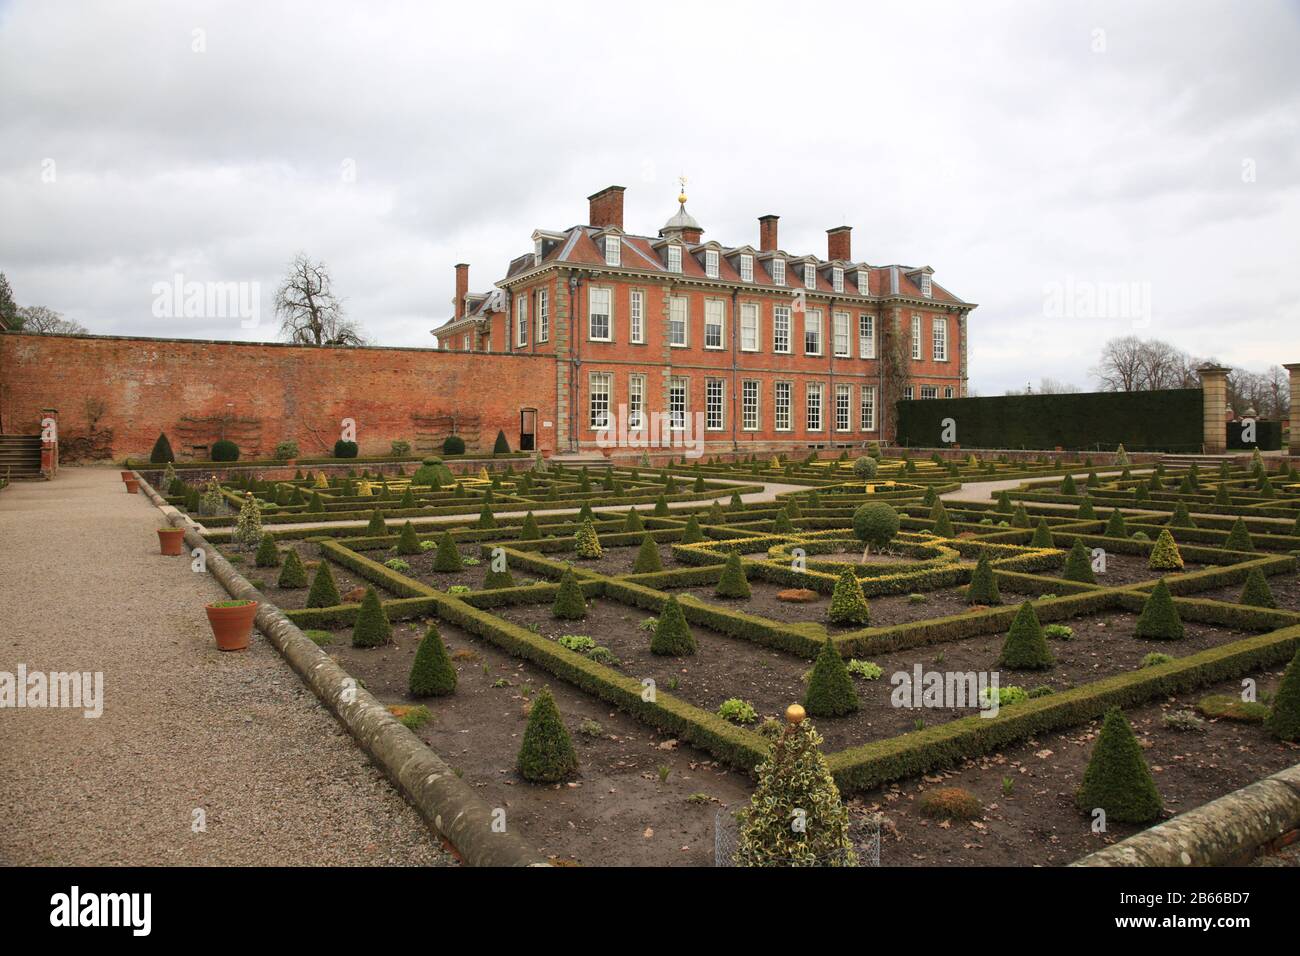 View of the formal garden at Hanbury hall, Worcestershire, England, UK. Stock Photo